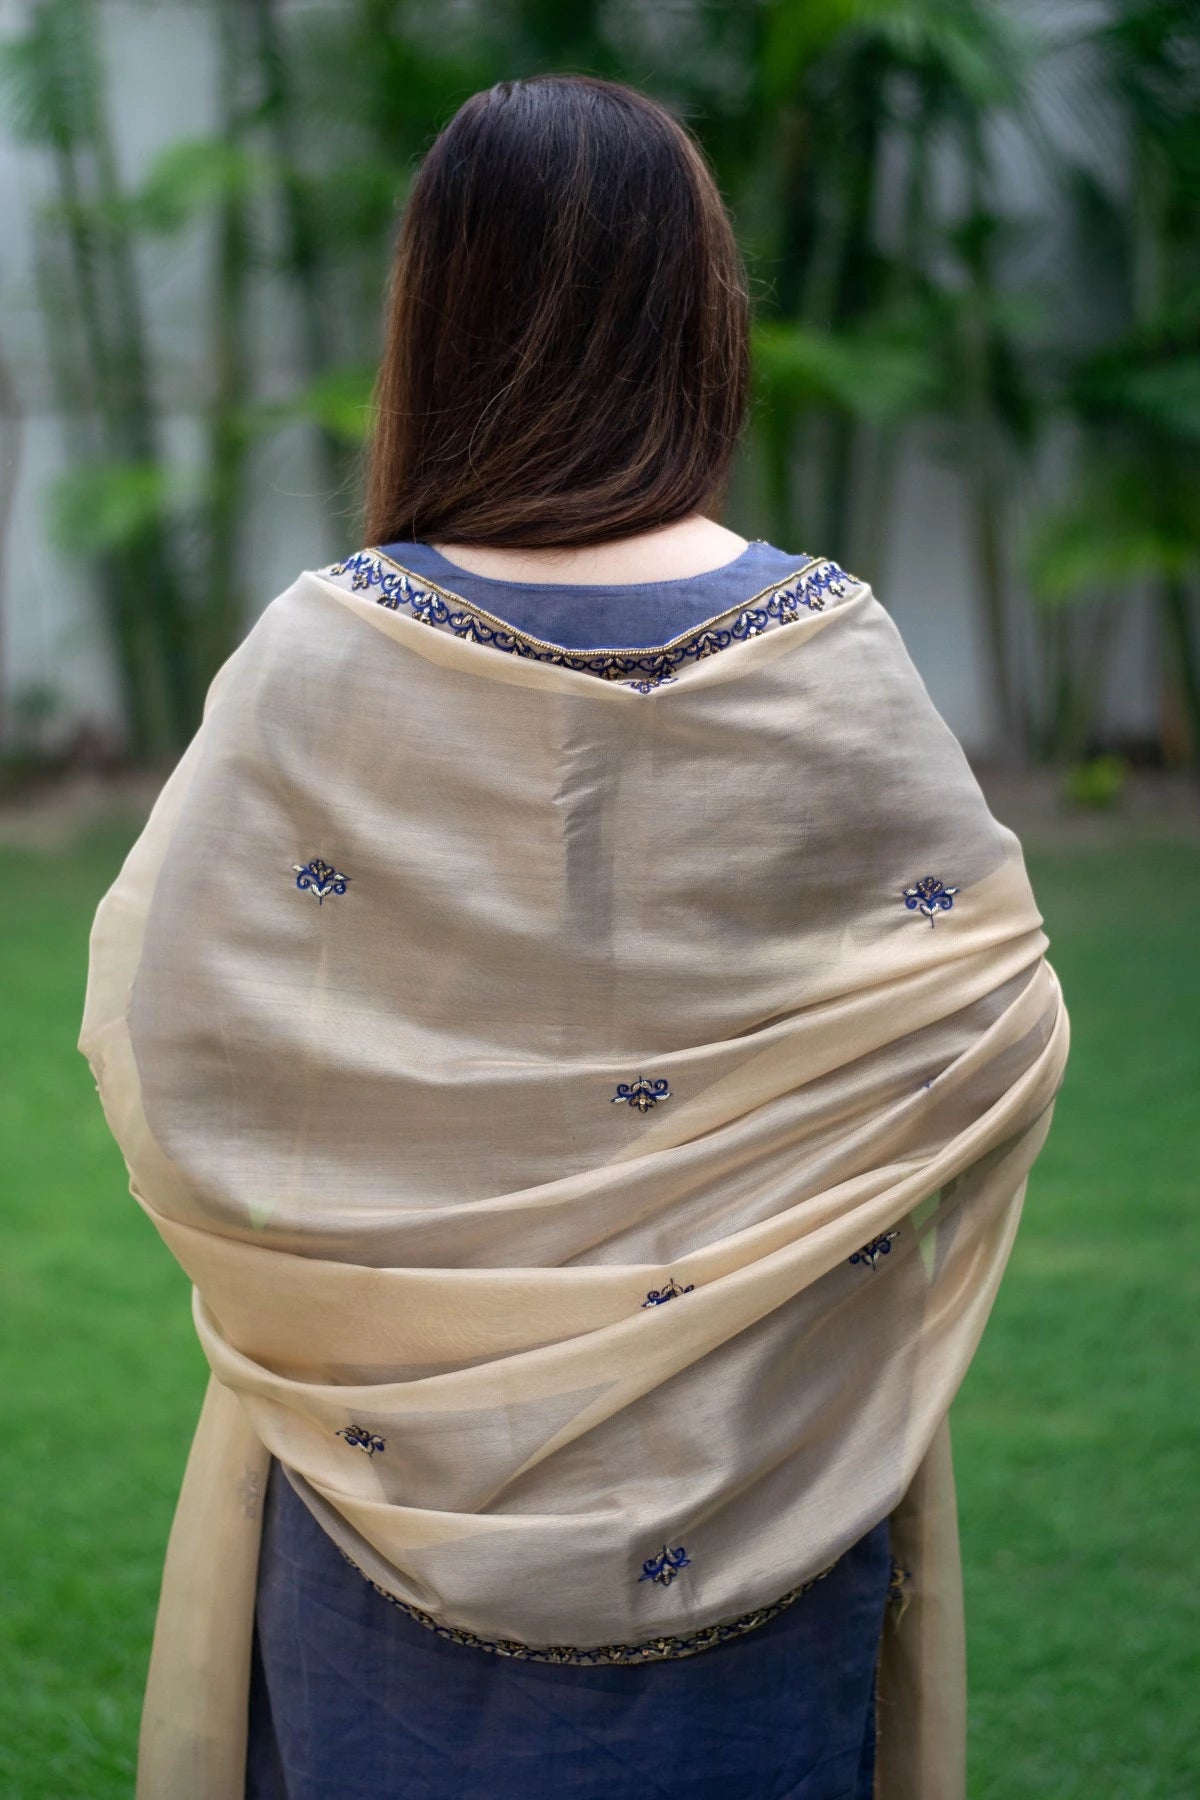 A woman wearing a blue kurta with intricate zardozi work and a matching golden tissue dupatta draped gracefully over her arms.